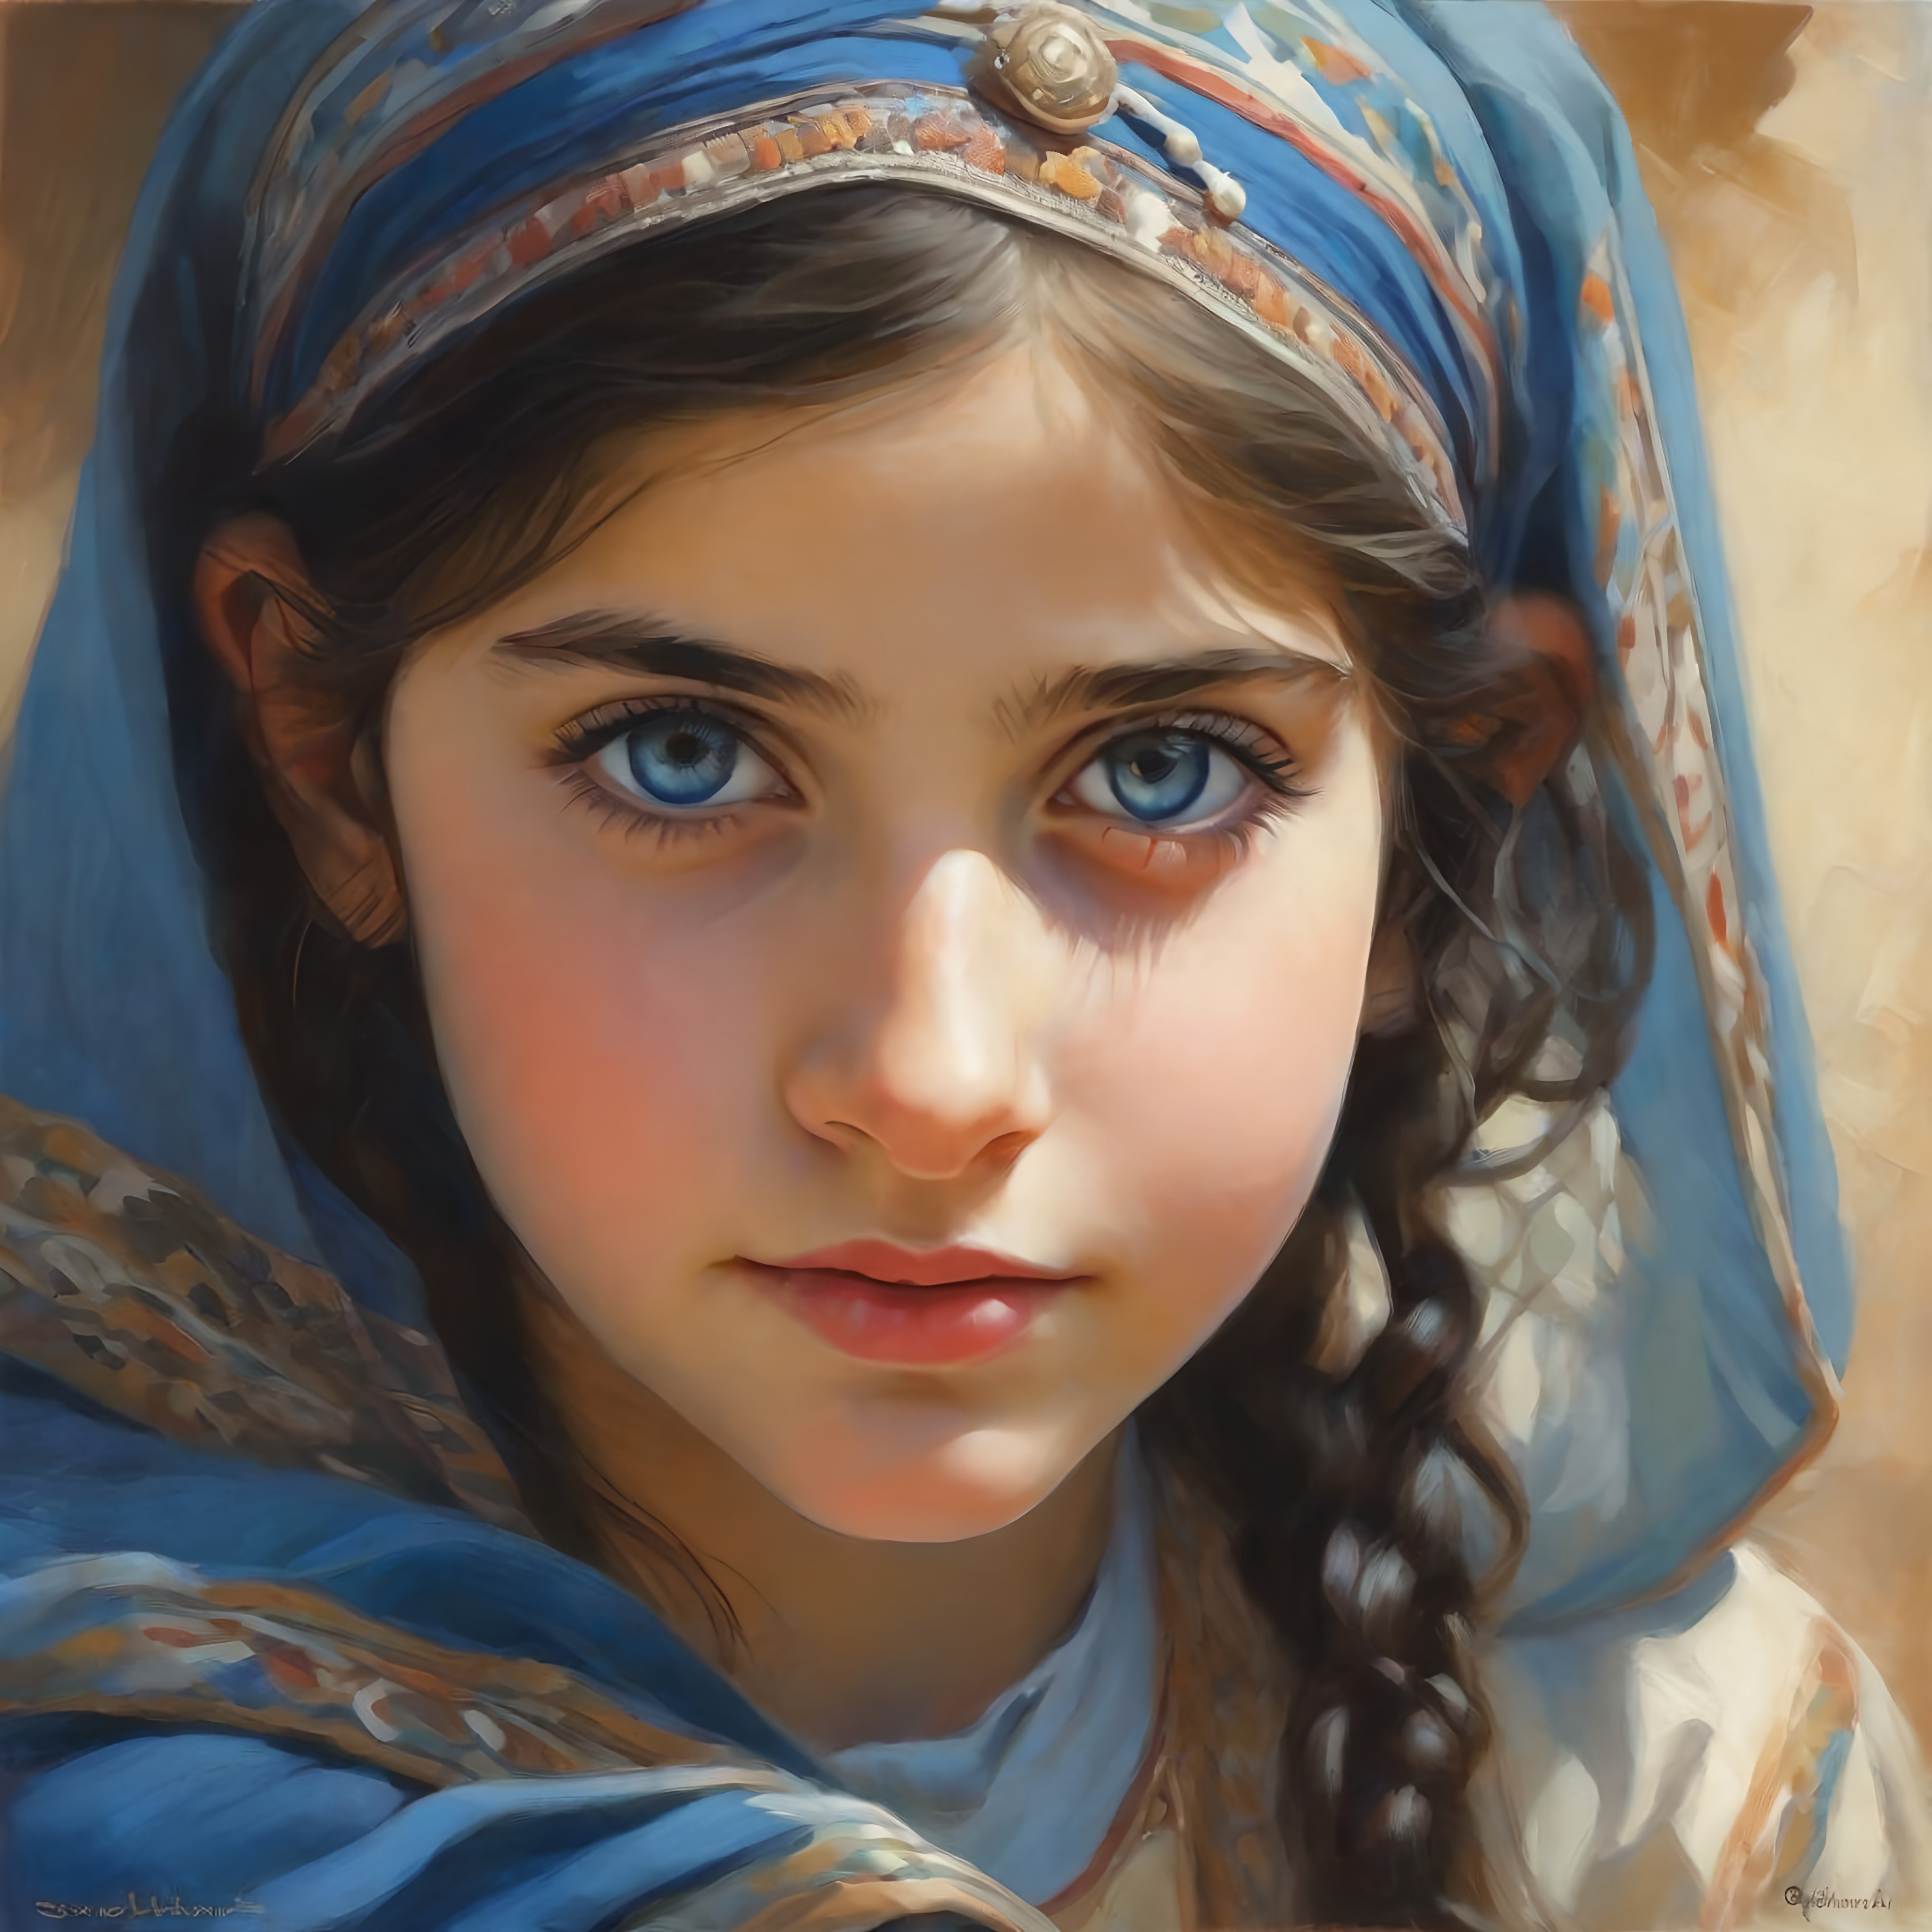 A 13 years old Syrian girl, pale skin, black hair, p... | OpenArt